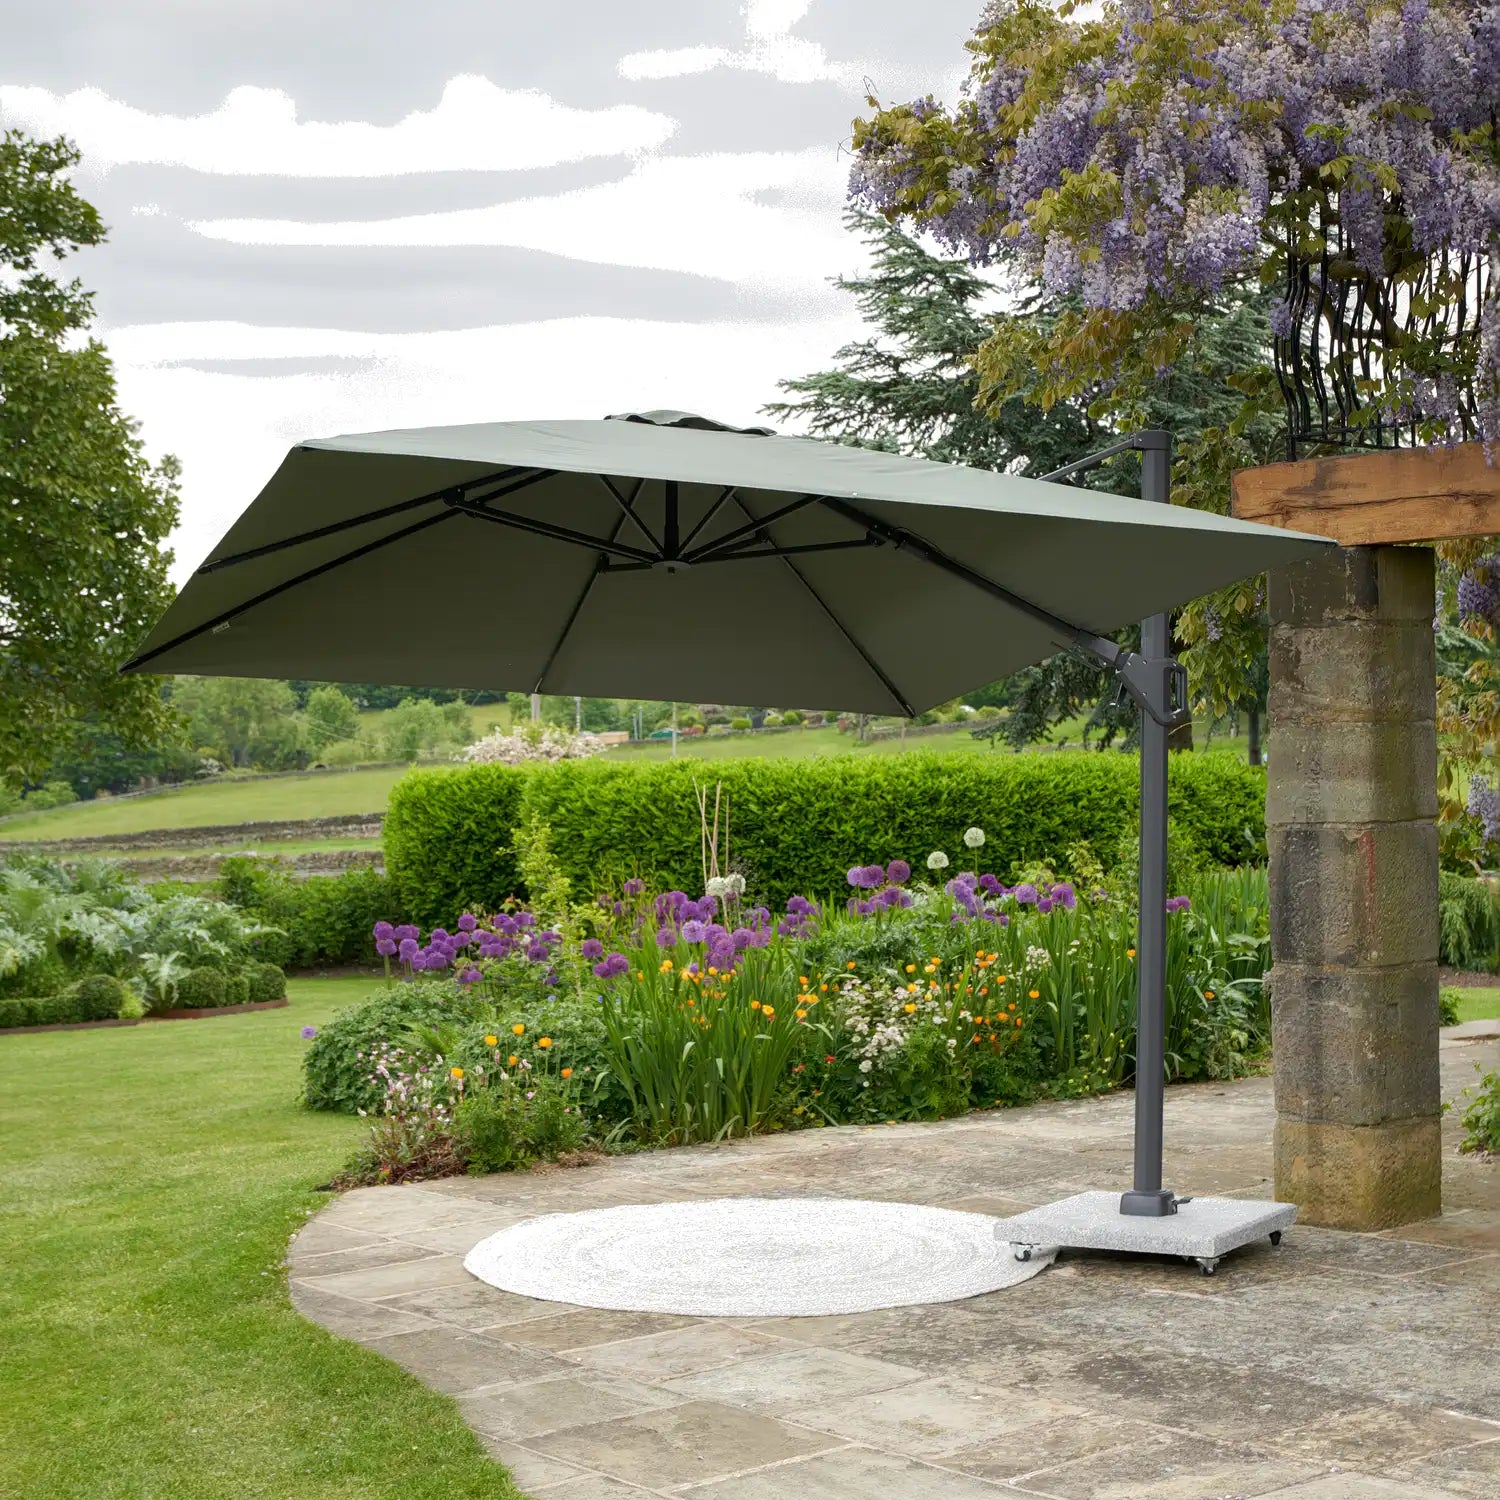 Platinum Challenger T2 3m Square Cantilever Parasol in Olive Green – Click Style